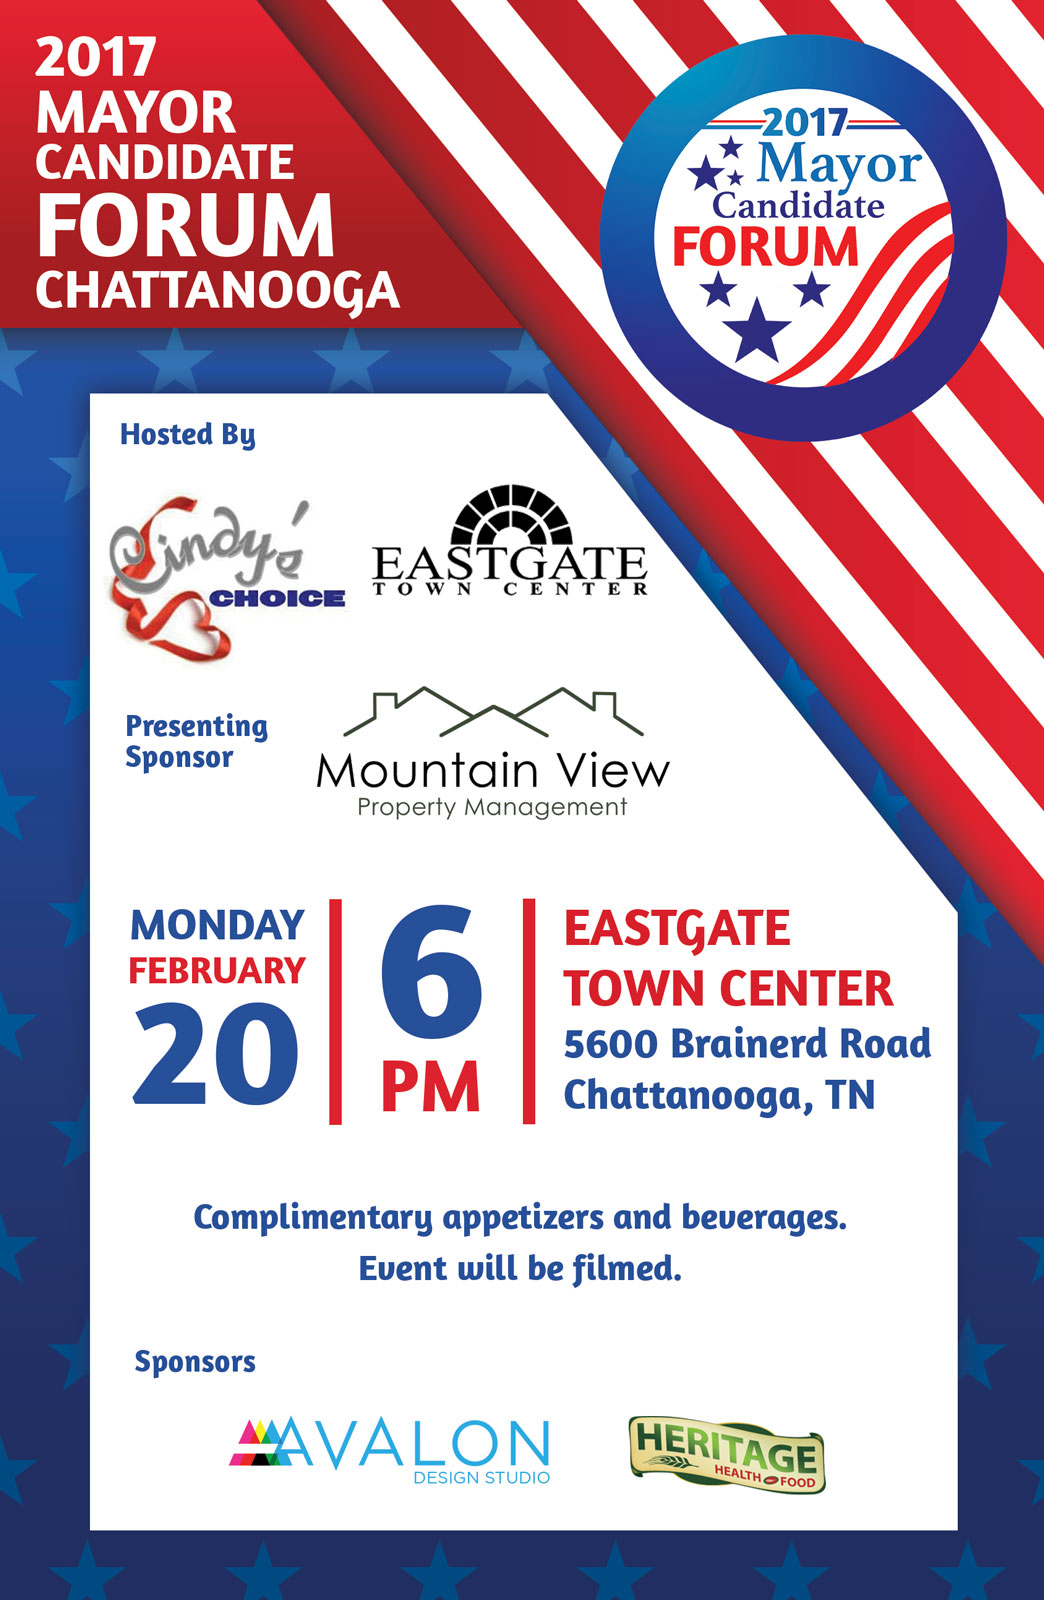 Eastgate Town Center - Chattanooga 2017 Mayor Candidate Forum Event 